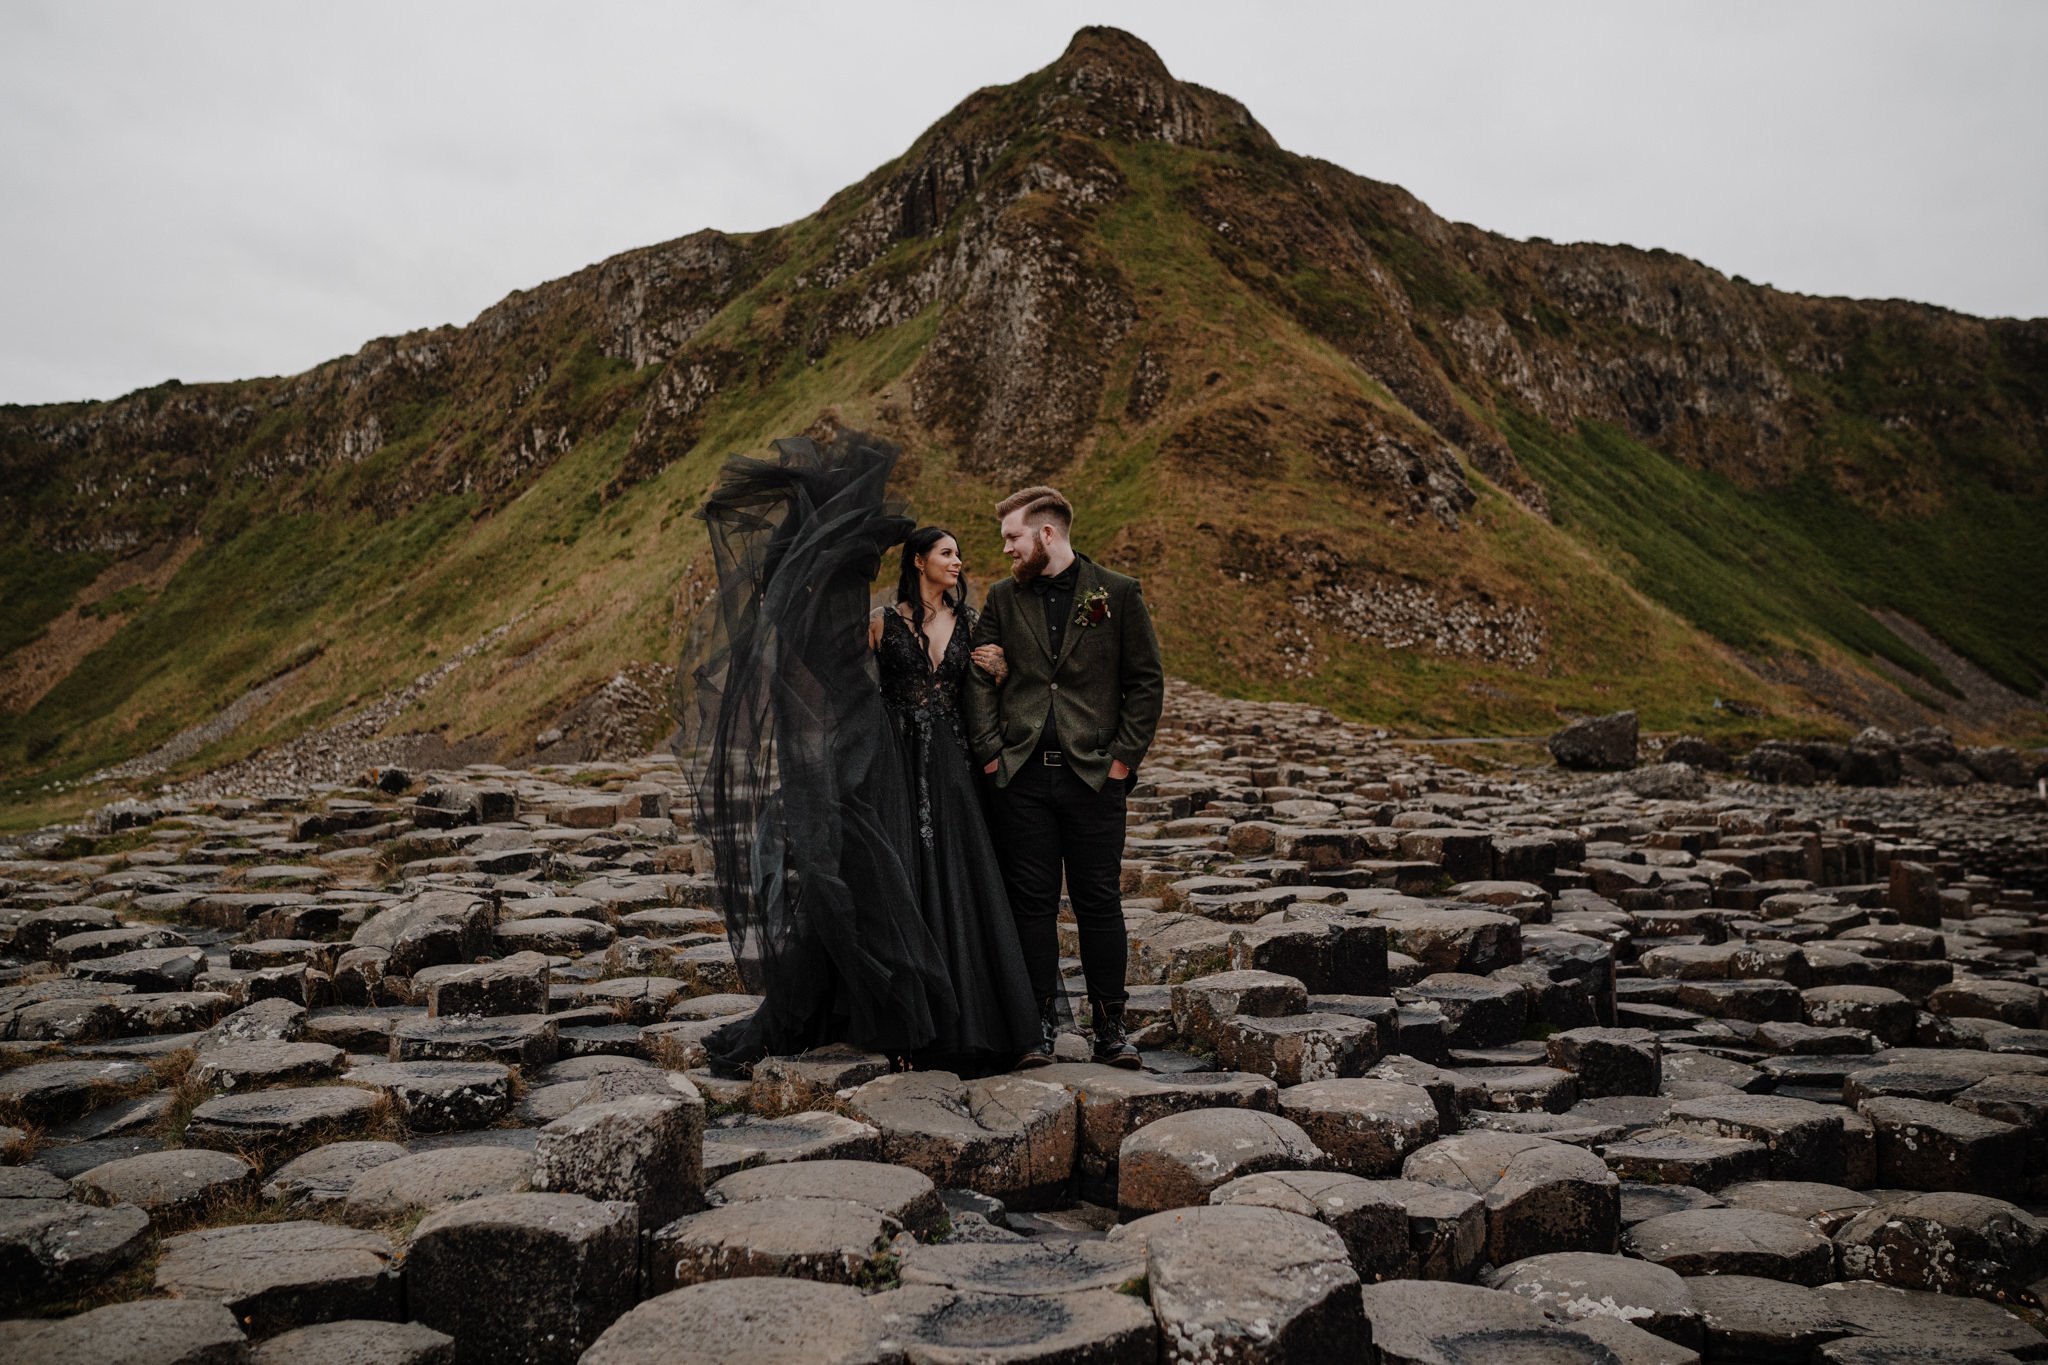  alternative American couple elope in northern ireland at the giants causeway in a black wedding dress and tweed suit 